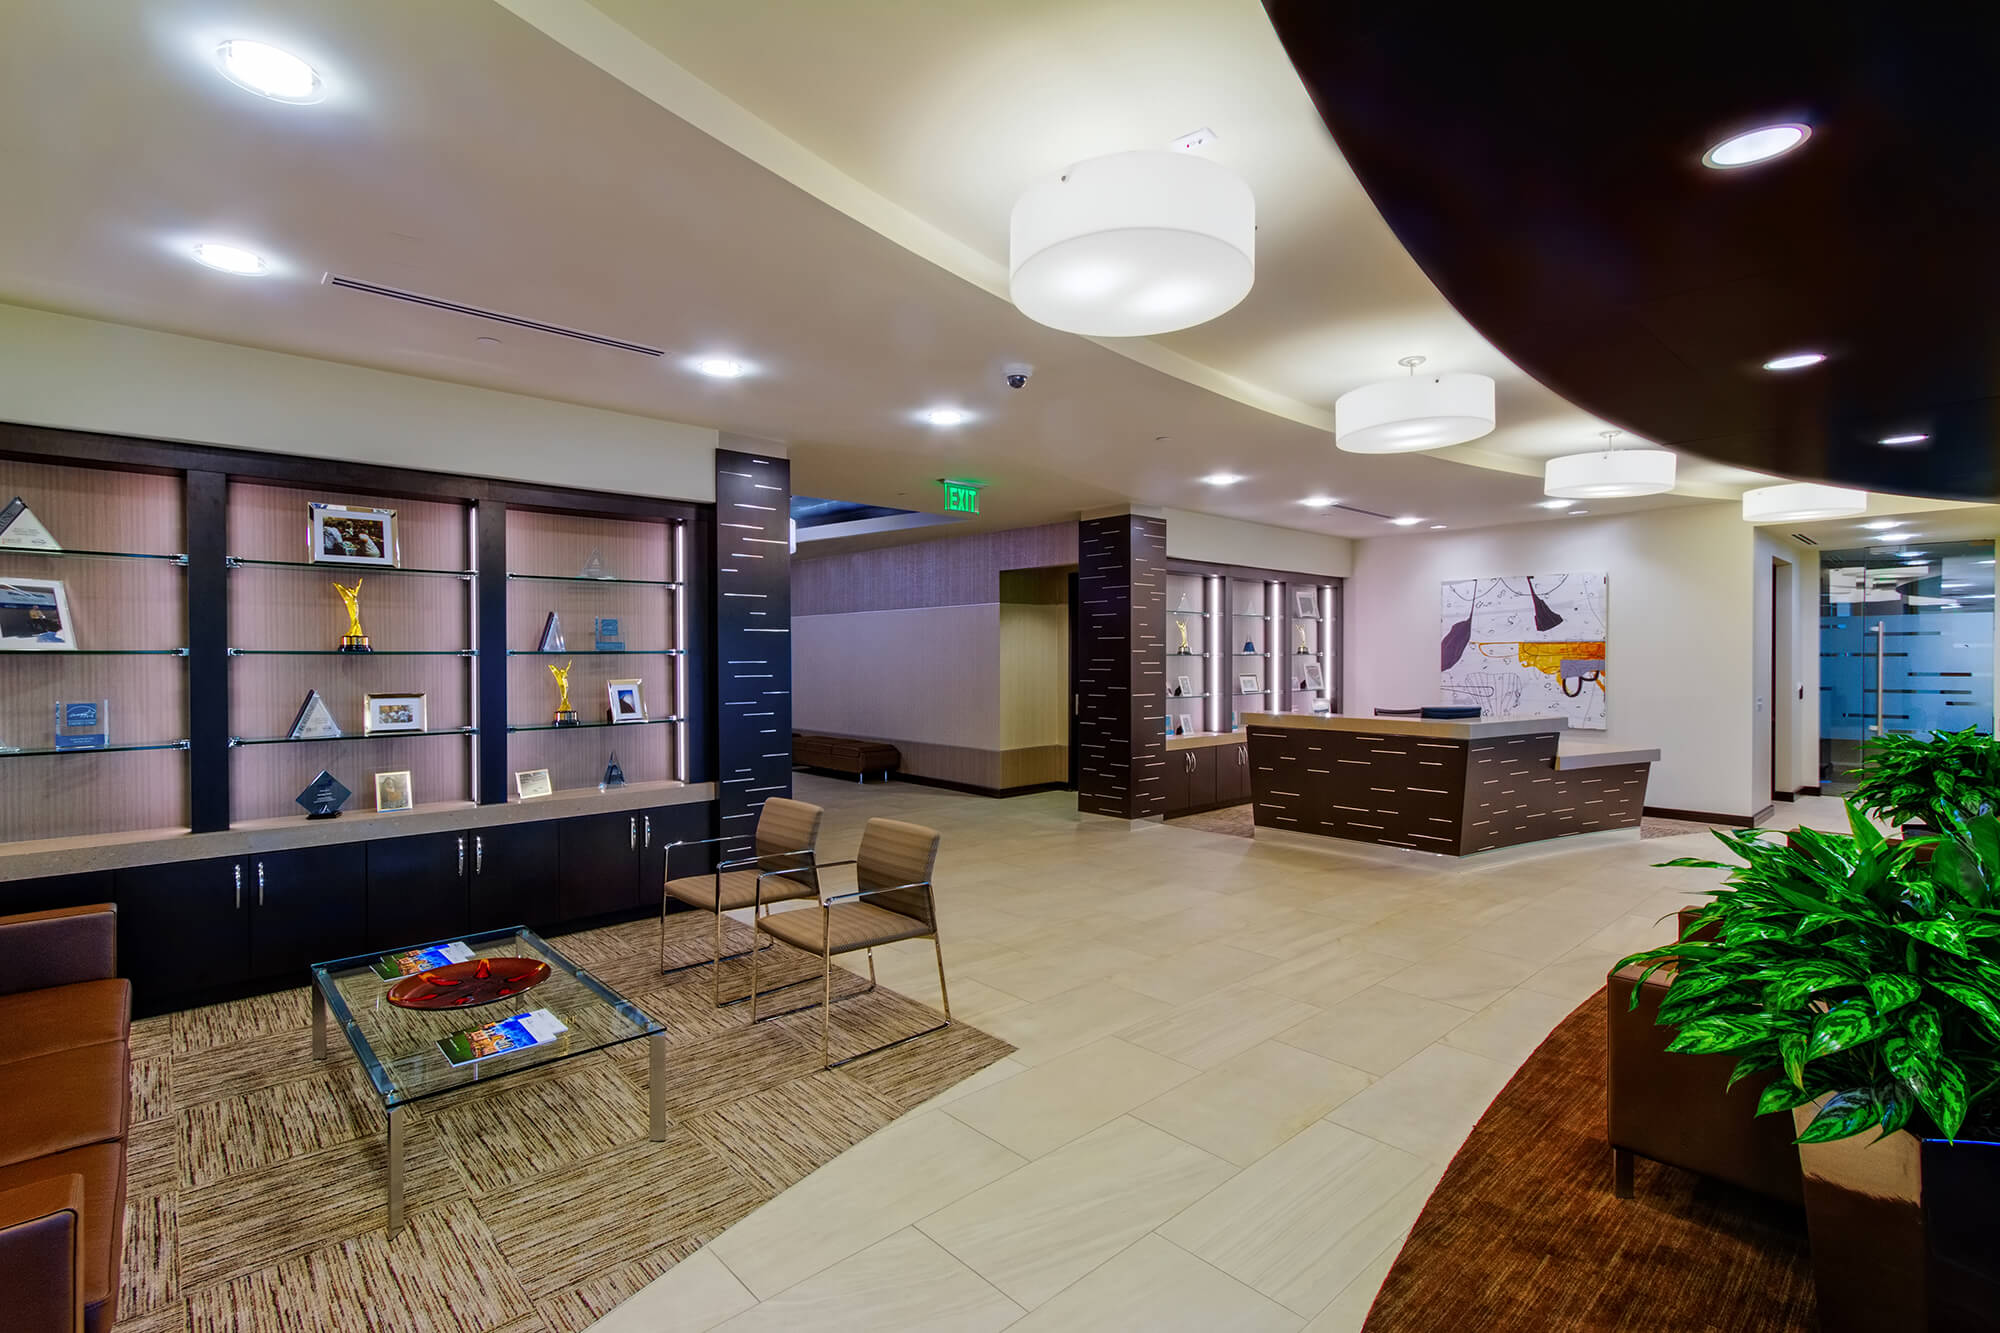 #Flashbackfriday to our work on Meritage Homes Corporate Headquarters in Scottsdale, Arizona! This 55,000S SF Class A office T.I. features stylish designs, a large training room, and a state-of-the-art conference room. Intense planning and coordination were required to properly sequence material deliveries and installations. Unique design elements included leather-wrapped ceilings, extensive millwork, custom framing features, and high-end lighting. See the full project at the link below! https://www.venncompanies.com/projects/tenant-interiors/meritage-homes/ Architect: @pinnacledesignaz . . . . . #construction #commercialrealestate #constructionmarketing #constructionequipment #commercialrealestate #constructionmanagement #constructionsite #contractor #contractorlife #contractors #contractorsofinsta #generalcontractor #generalcontractors #constructionphotos #realestate #constructionphotography #constructionlife #arizona #GC #Scottsdale #tenantinterior #meritagehomes #realestate